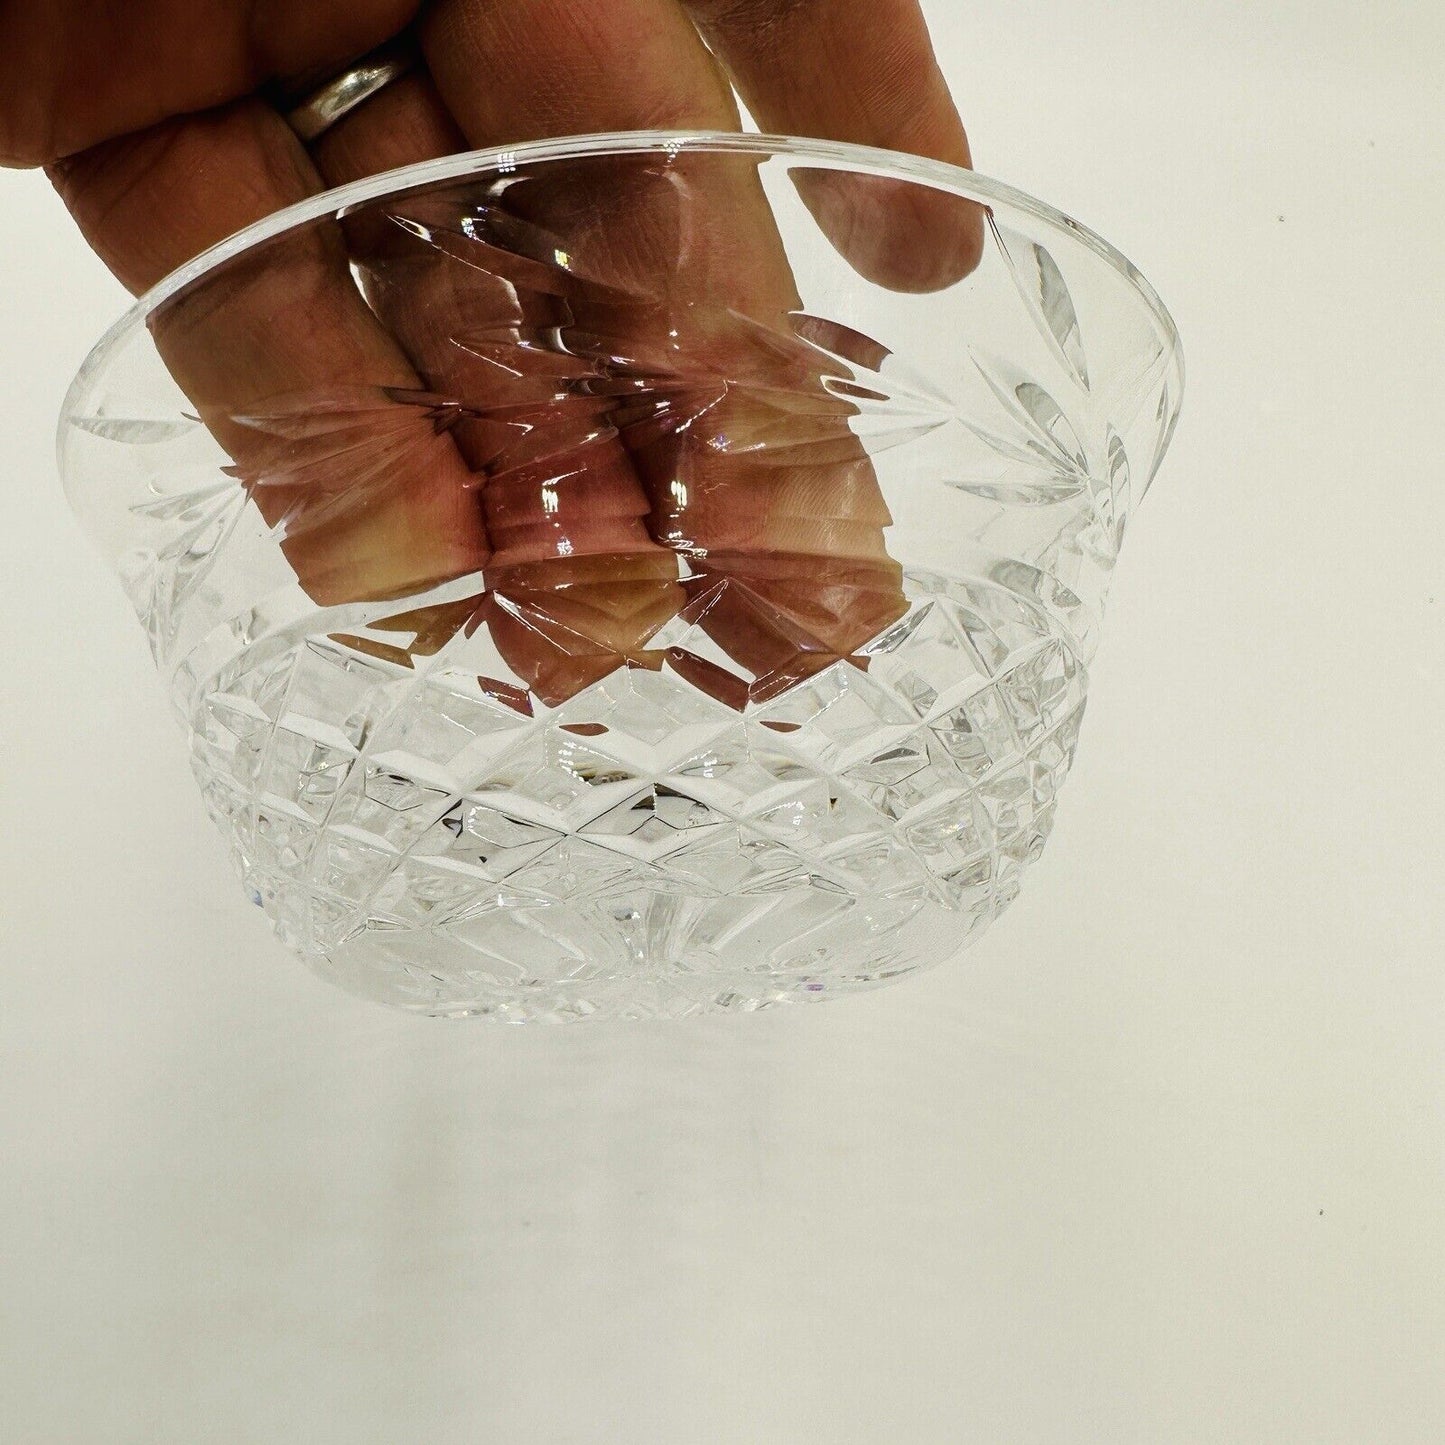 Waterford Crystal Glandore Round Finger Bowl Laurel Leaves Cut Glass 5 in Decor